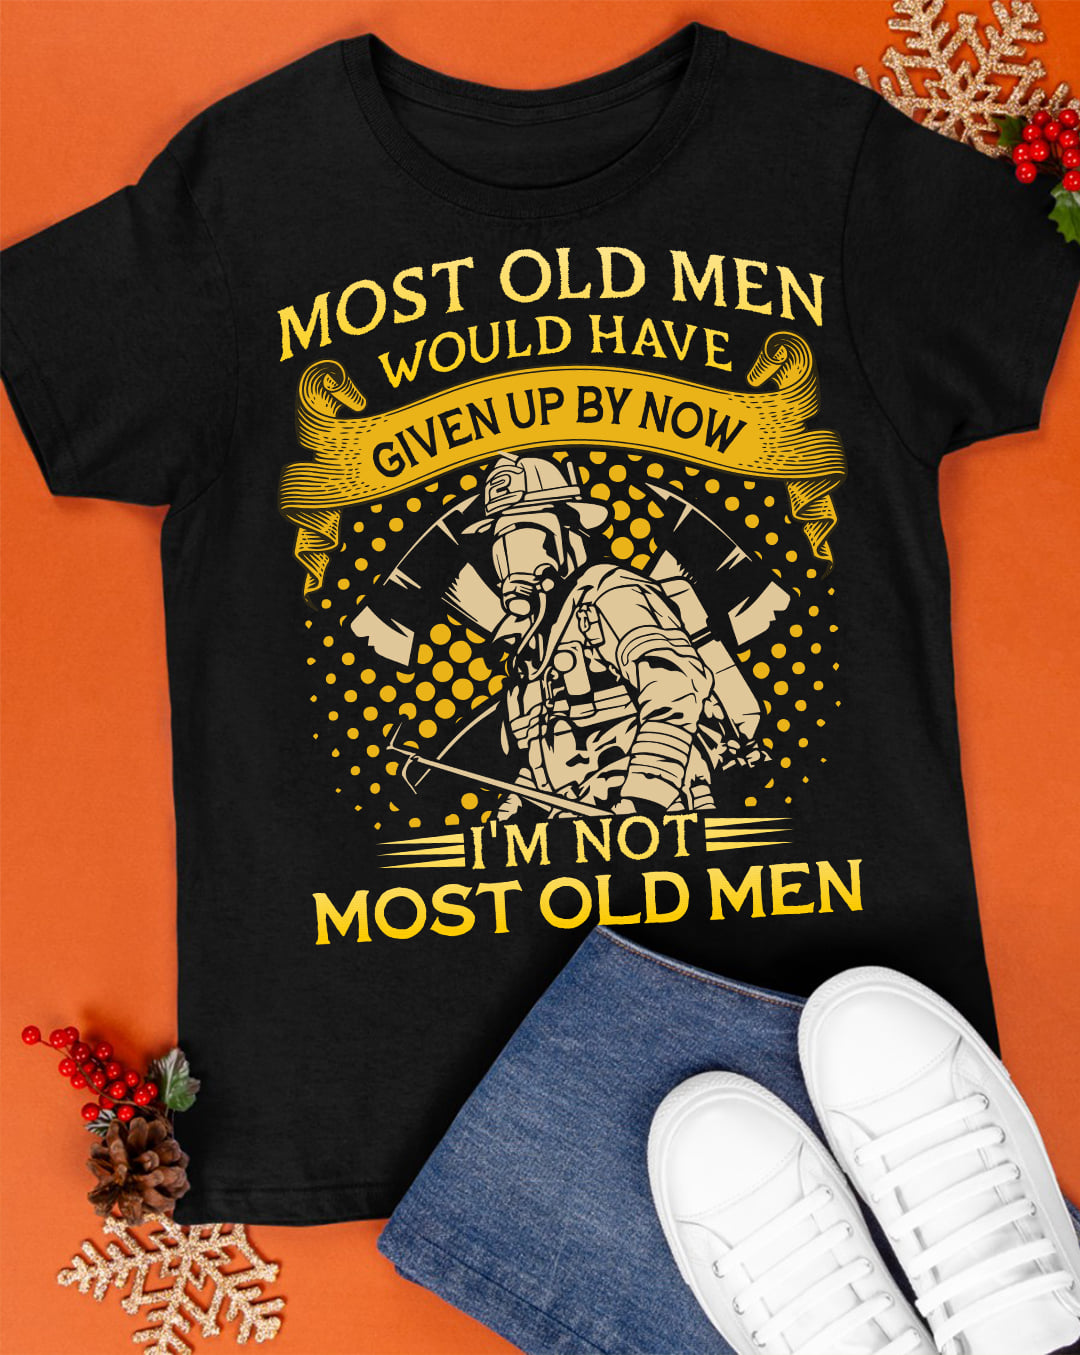 Most old men would have given up by now I'm not most old men - Old men firefighter, firefighter the job